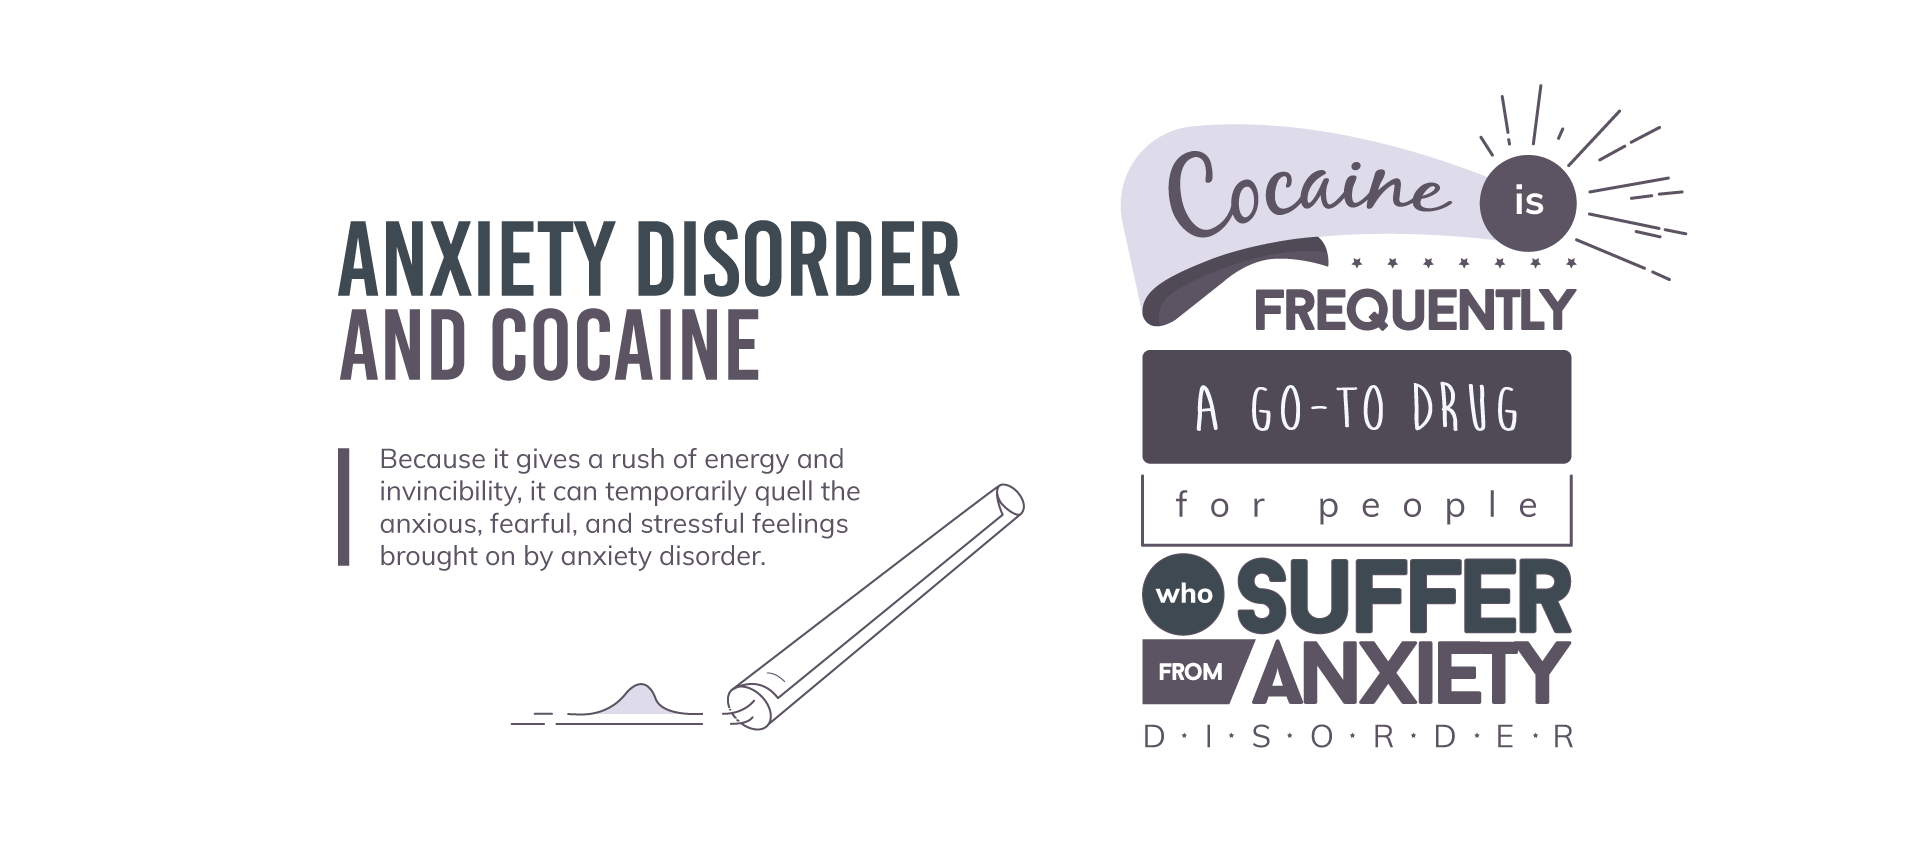 Anxiety Disorder and Cocaine